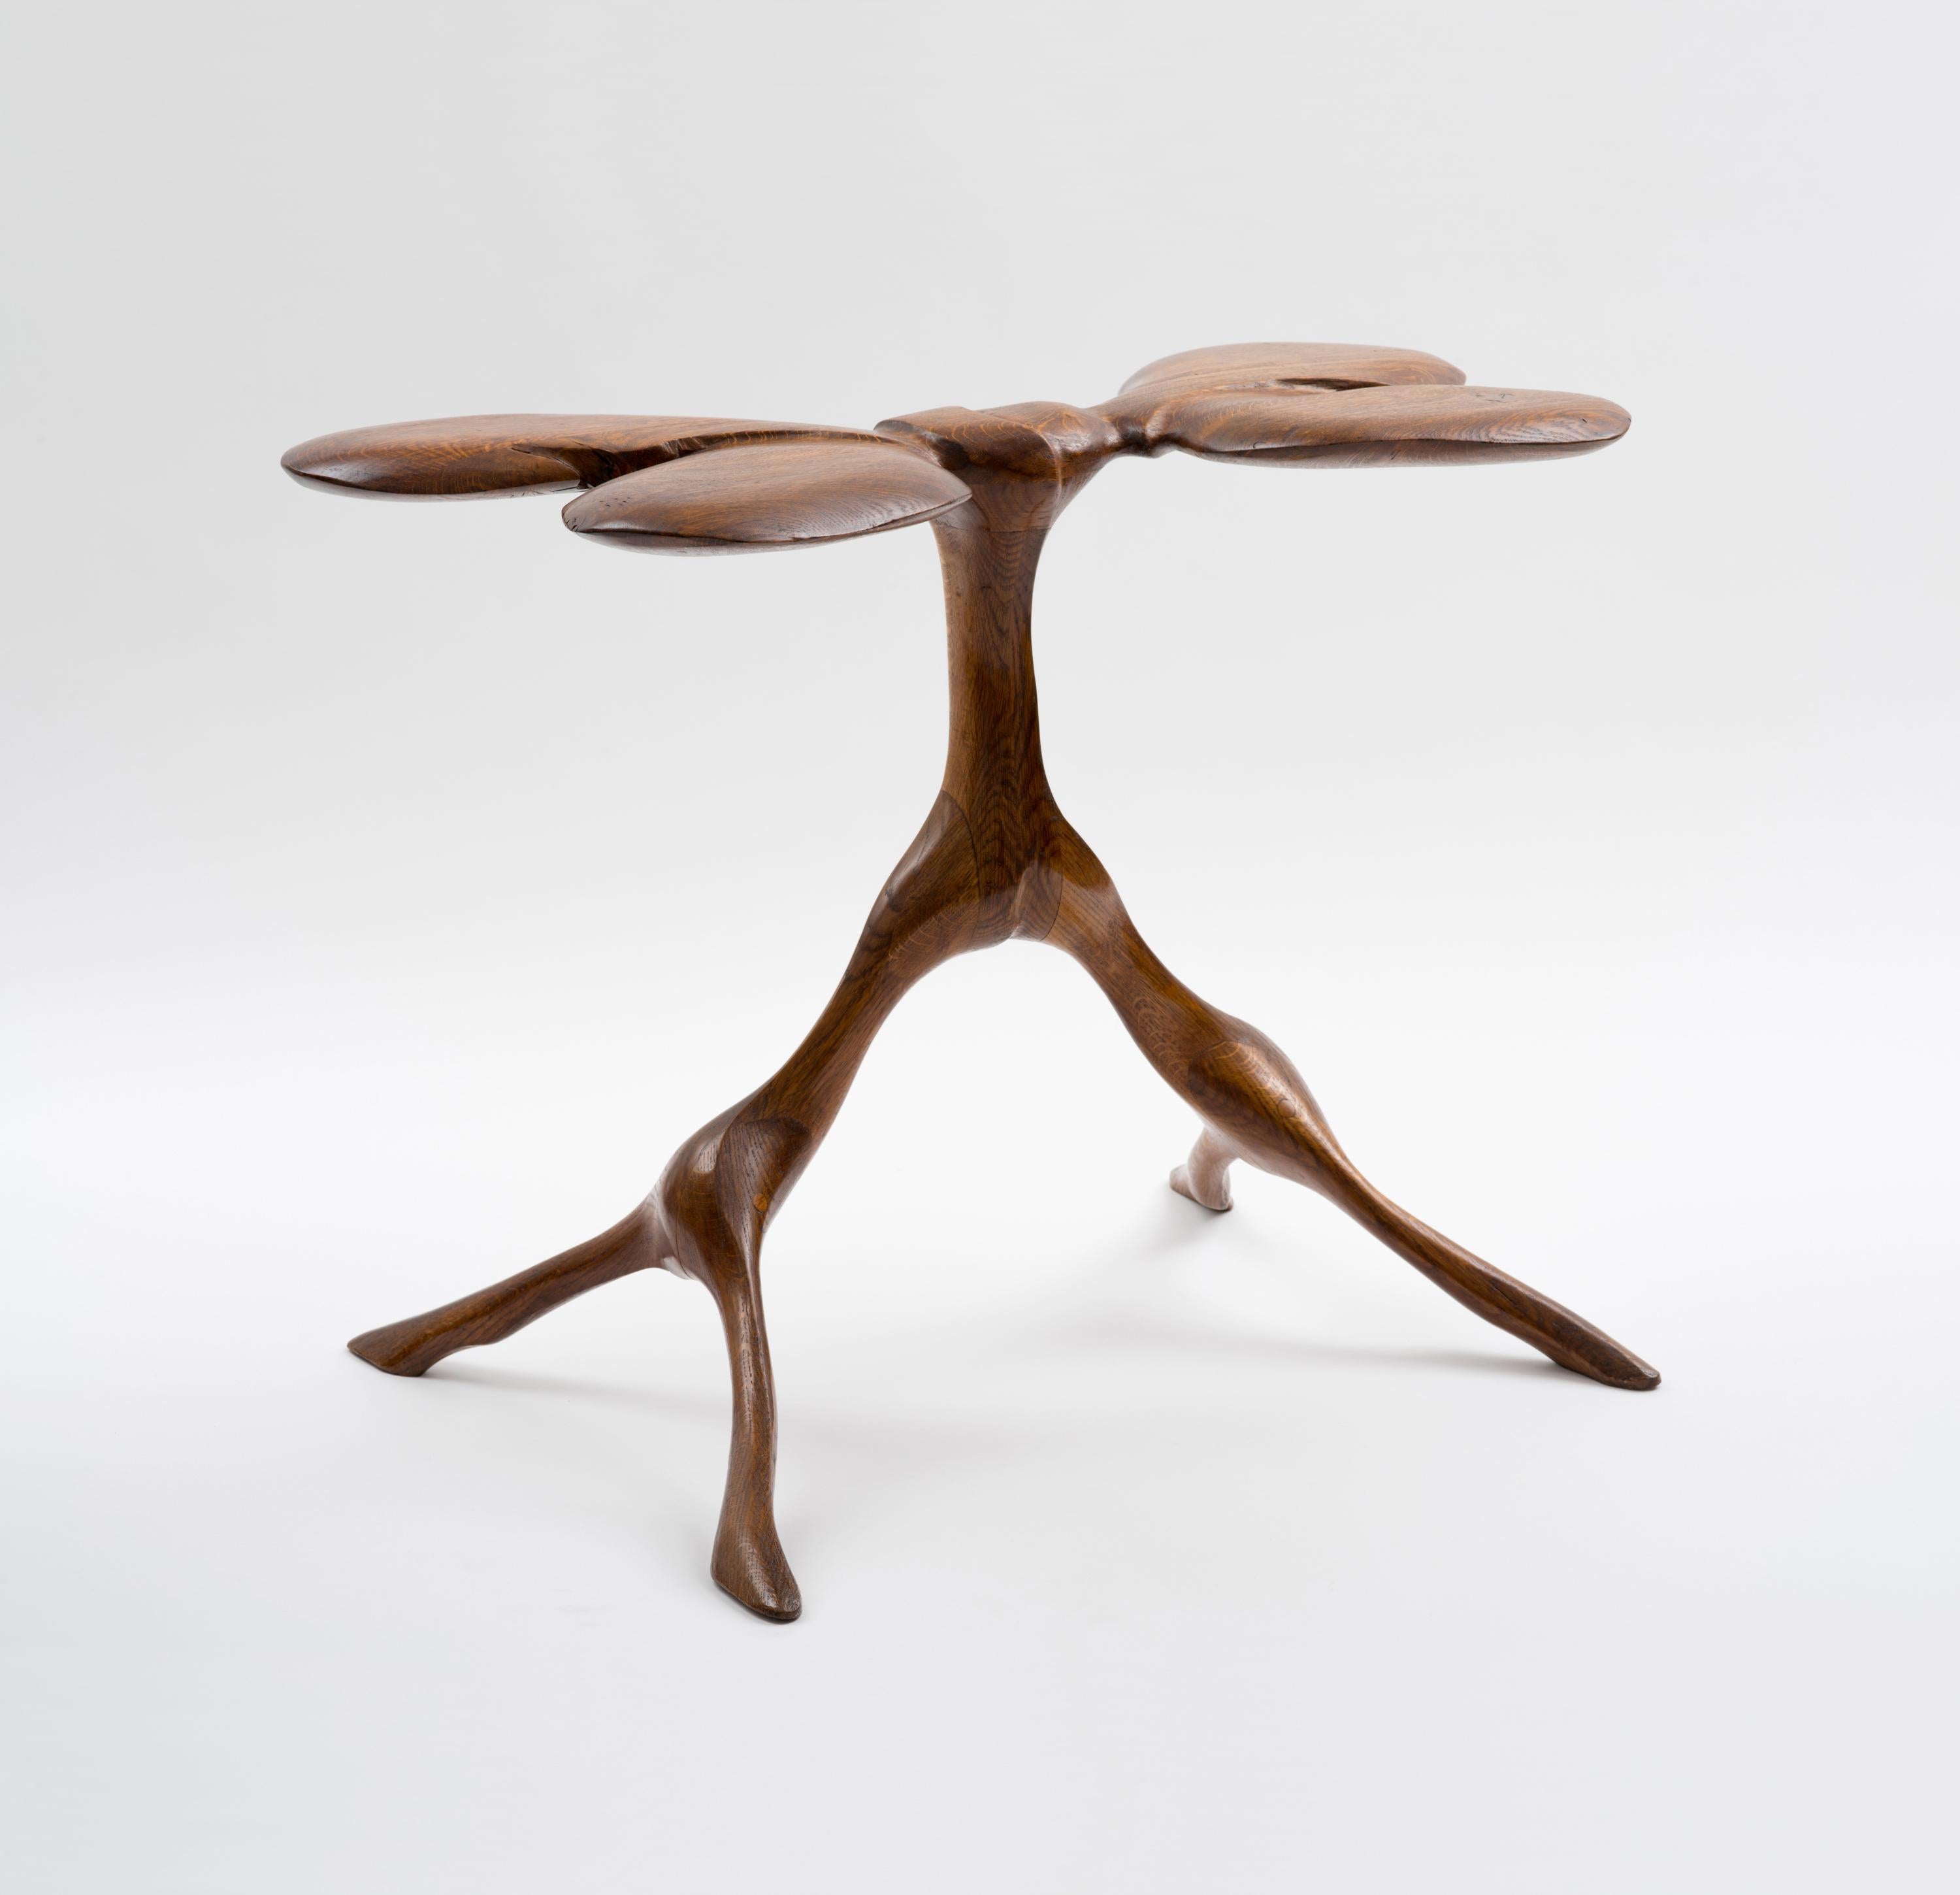 American Craftsman American Studio Movement Sculptural Dragonfly Table by Andrew J Willner, 1973 For Sale